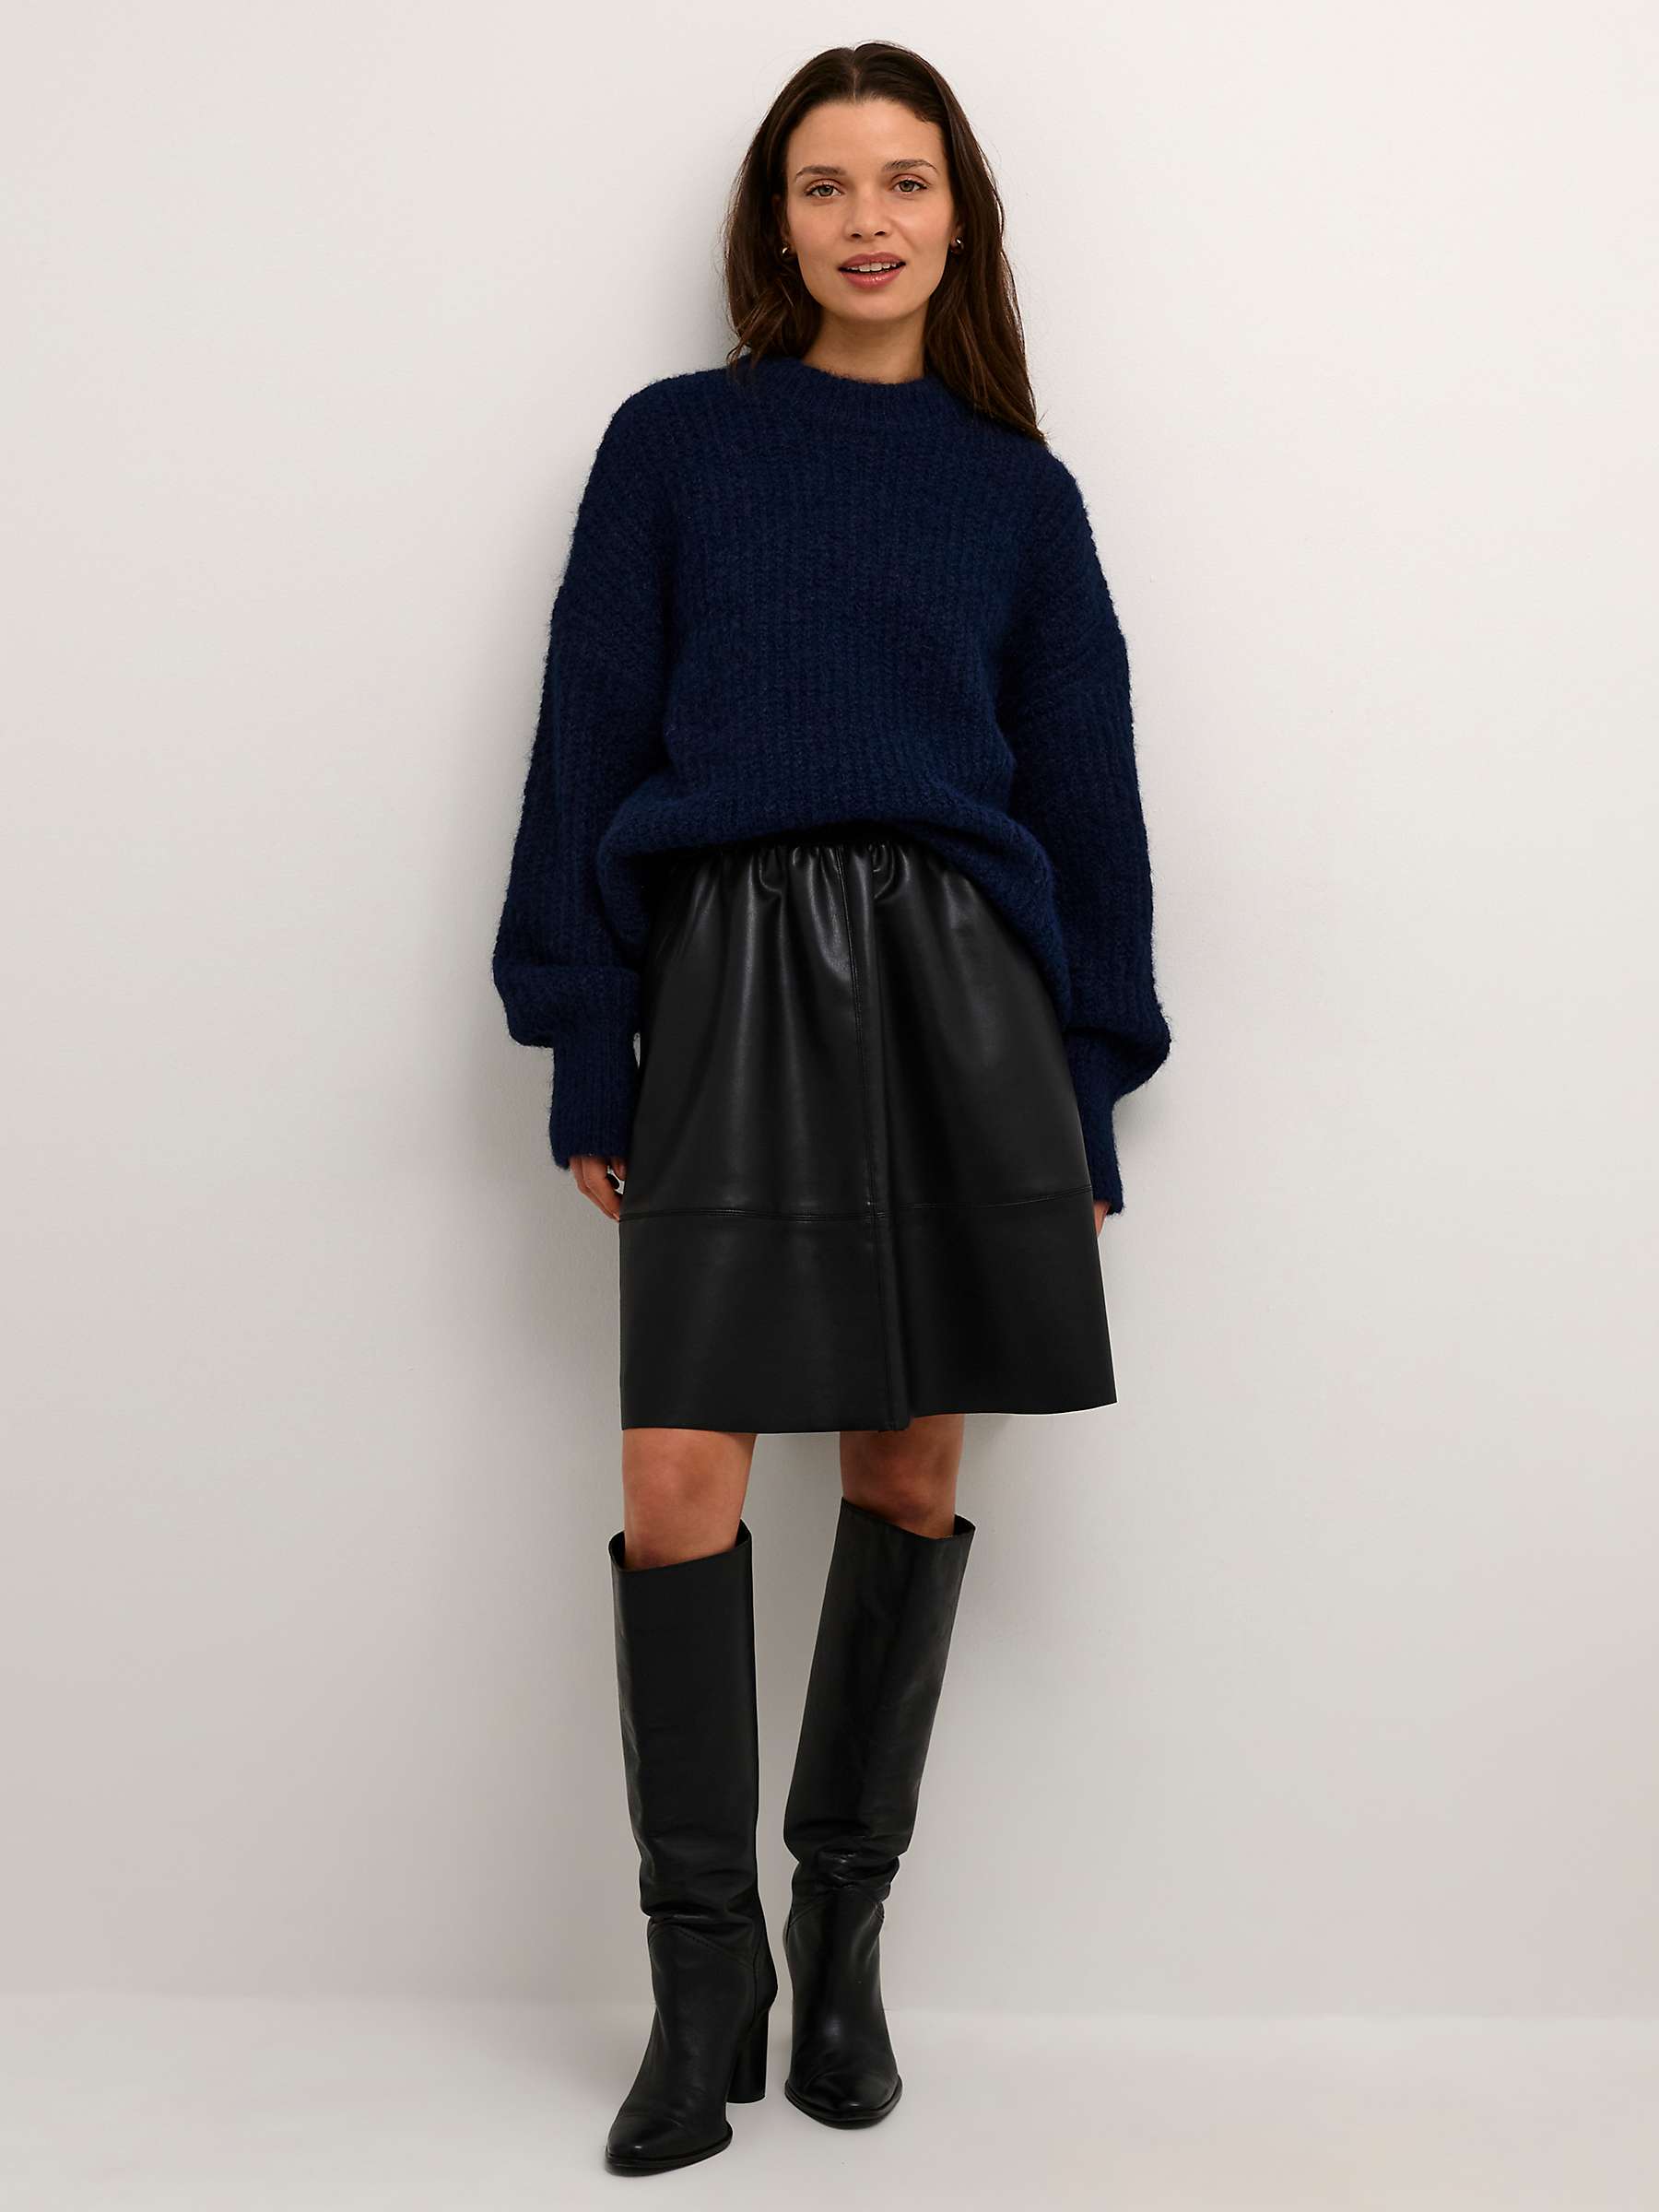 Great Plains Ania Faux Leather Skirt, Cocoa at John Lewis & Partners